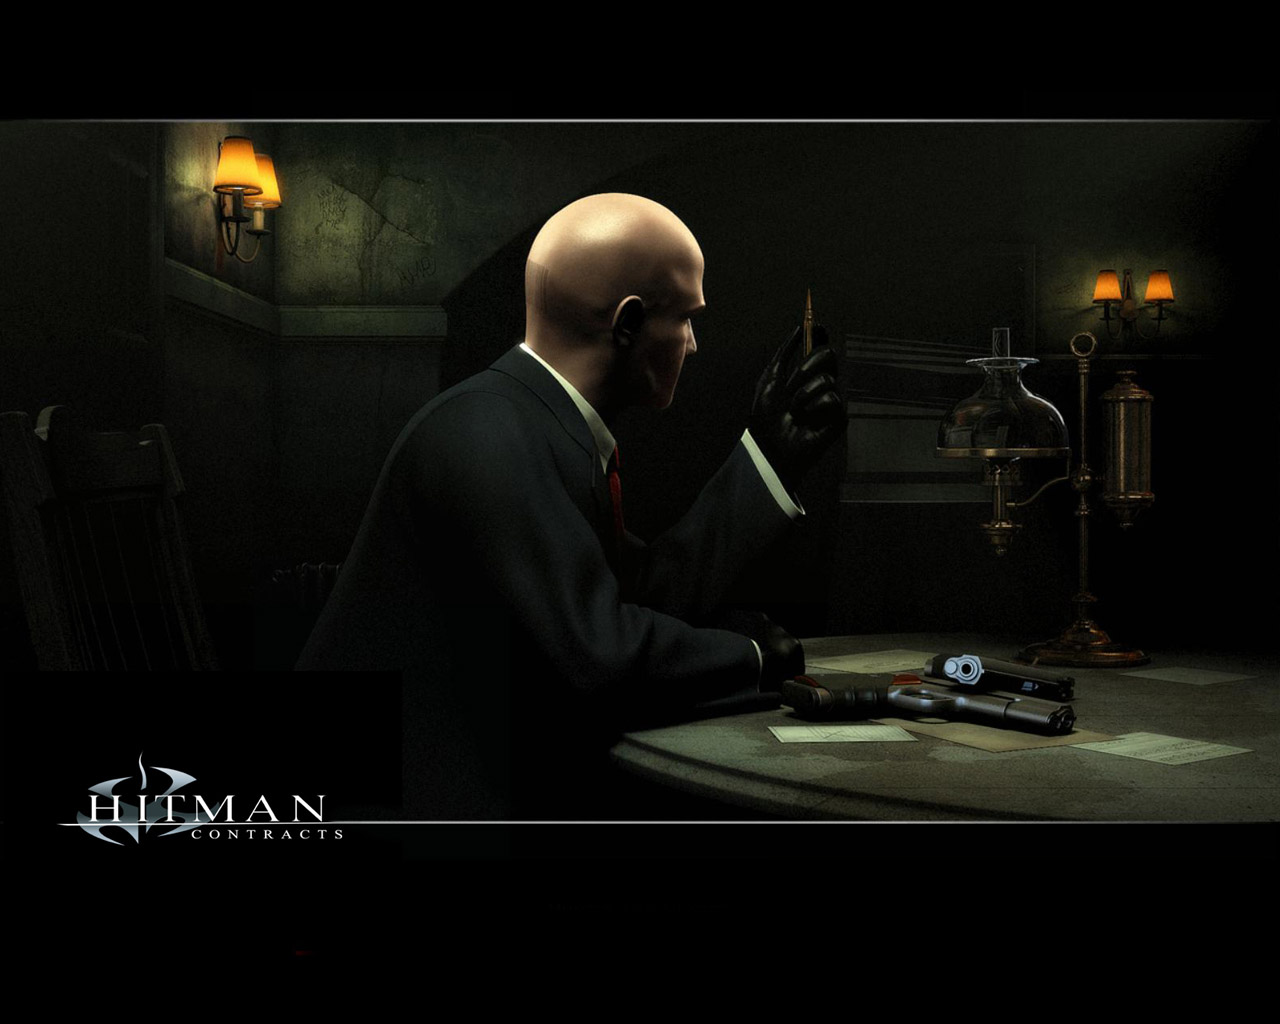 hitman contracts pc game download